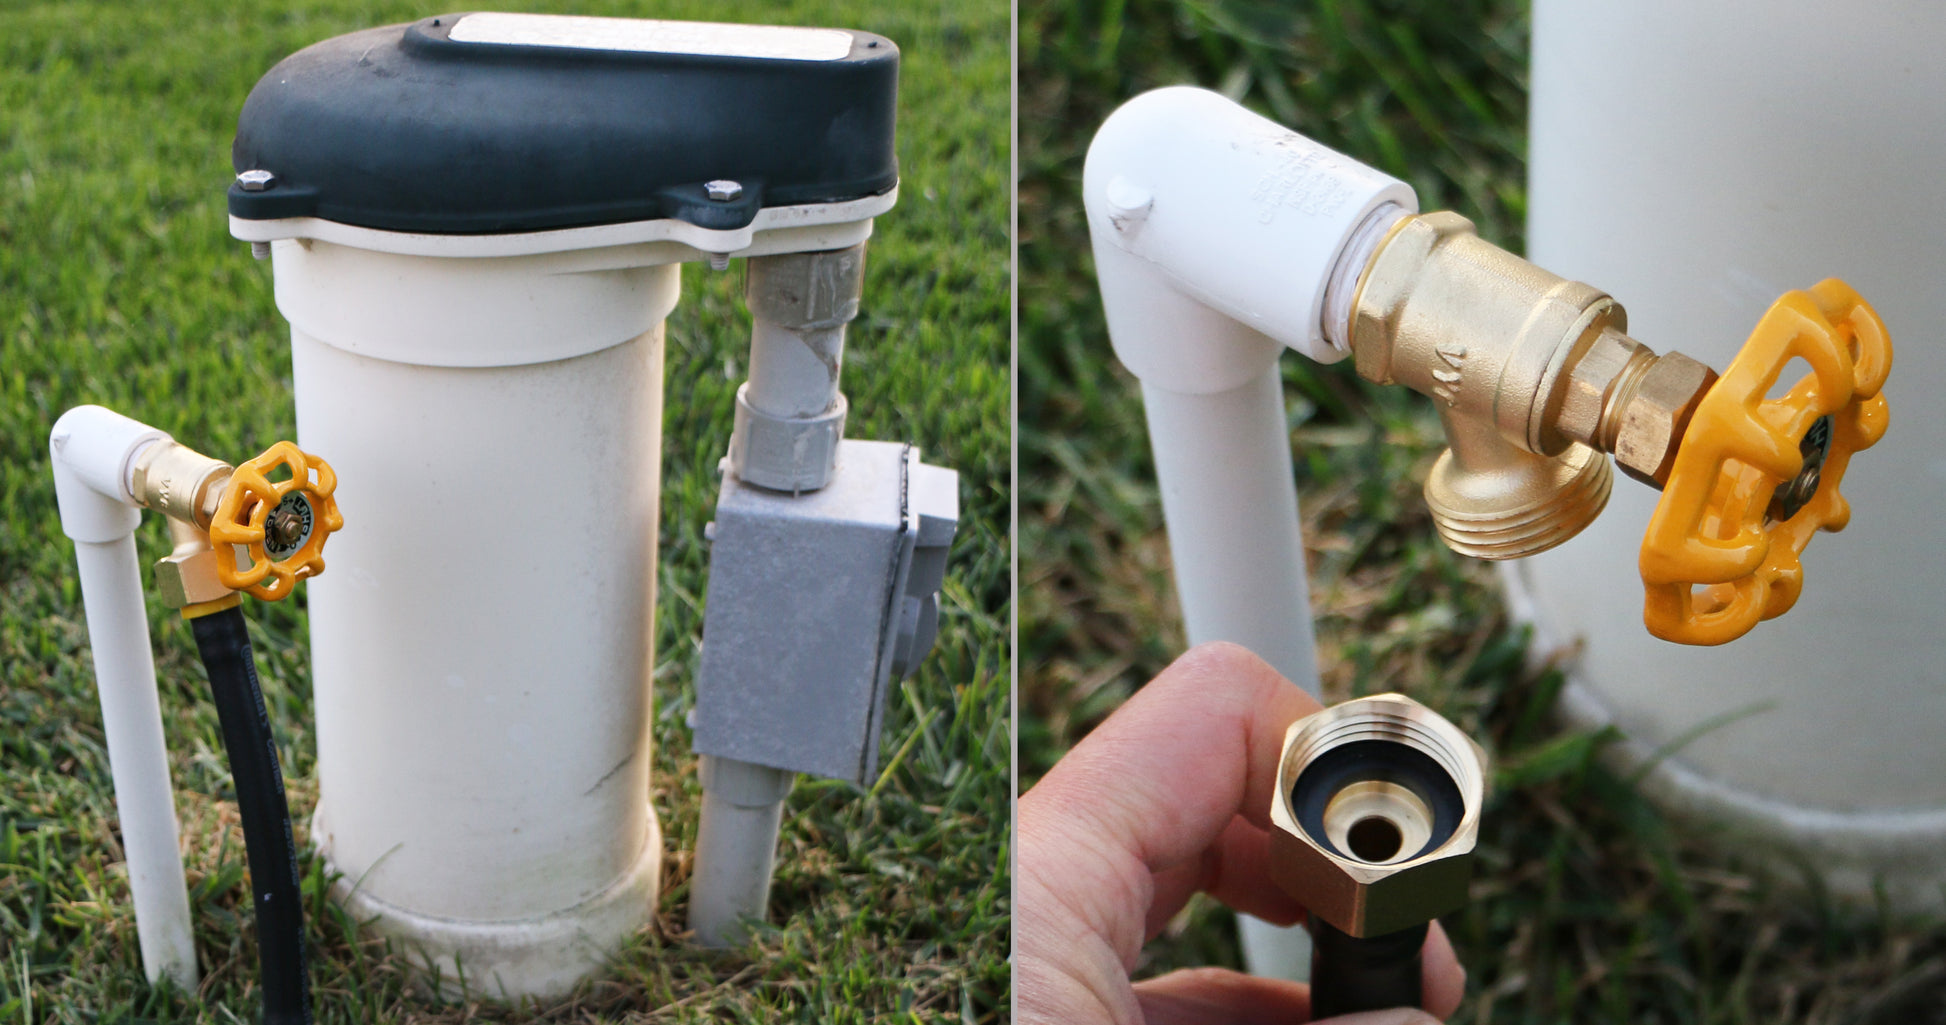 Winterize Sprinkler Systems and Outdoor Faucets: Air Compressor Quick-Connect Plug To Female Garden Hose Faucet Blow Out Adapter with Shut Off Valve (Lead-Free Brass), High Flow Plug